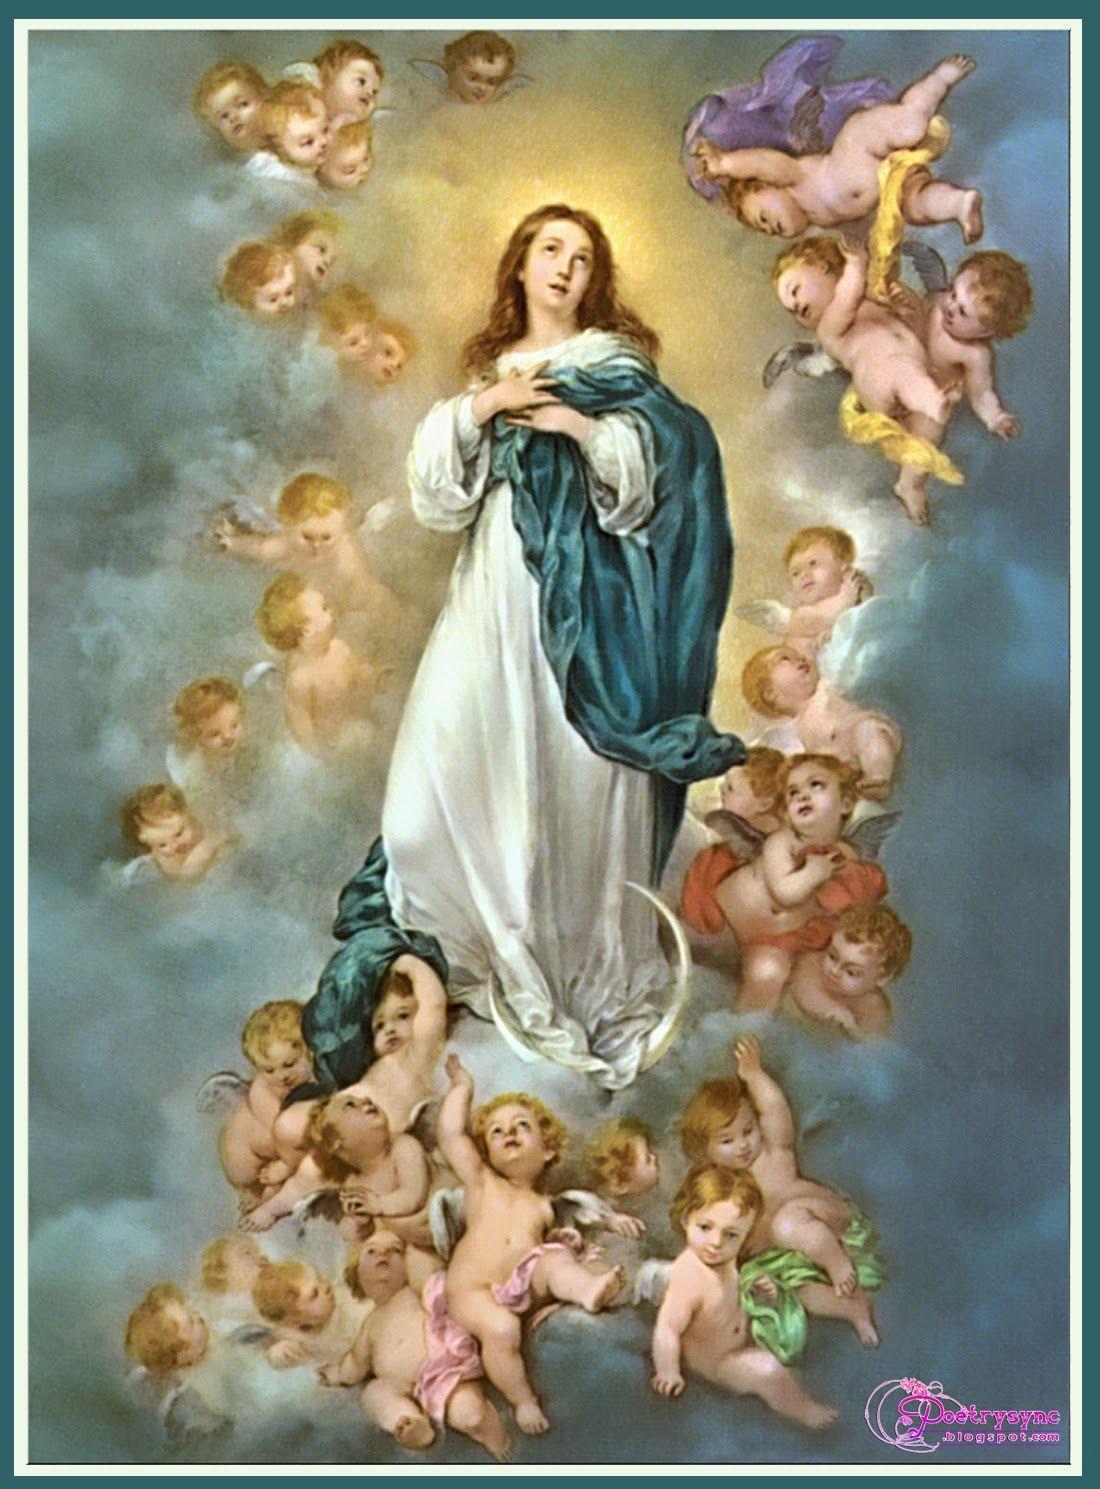 Merry Chrismast and Happy New Year: Feast of the Immaculate